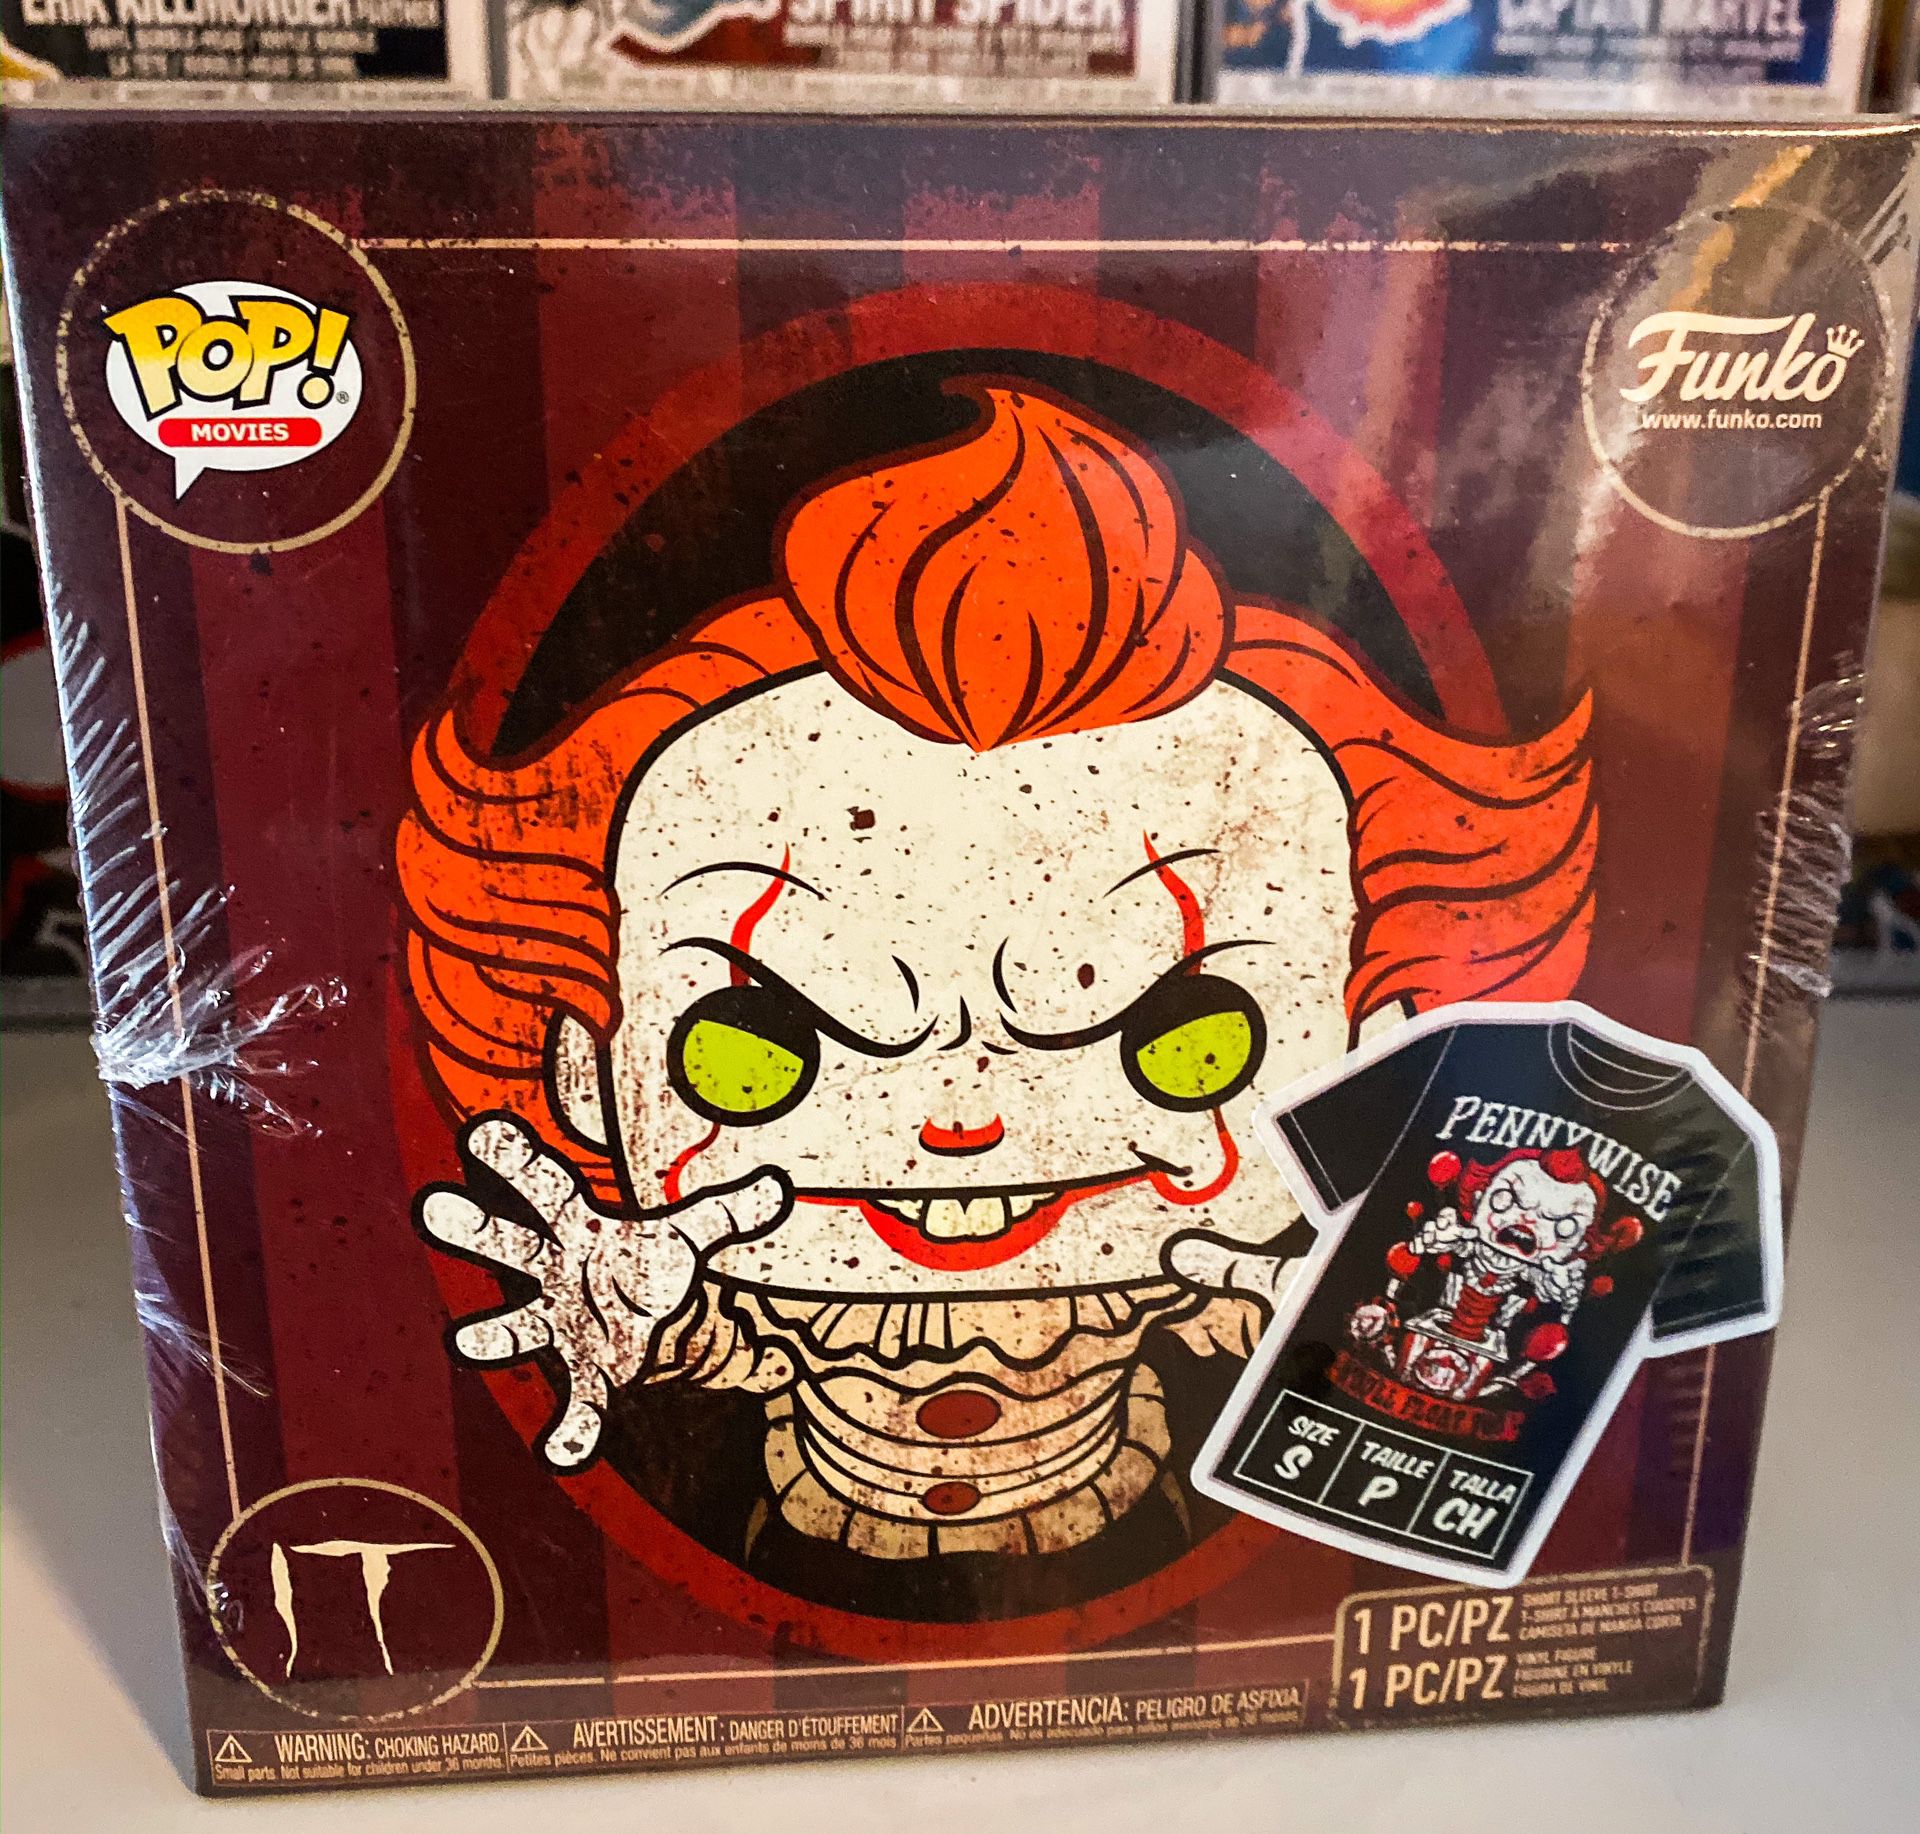 Funko Pop Pennywise (Metallic) POP and Tee “Small” Box